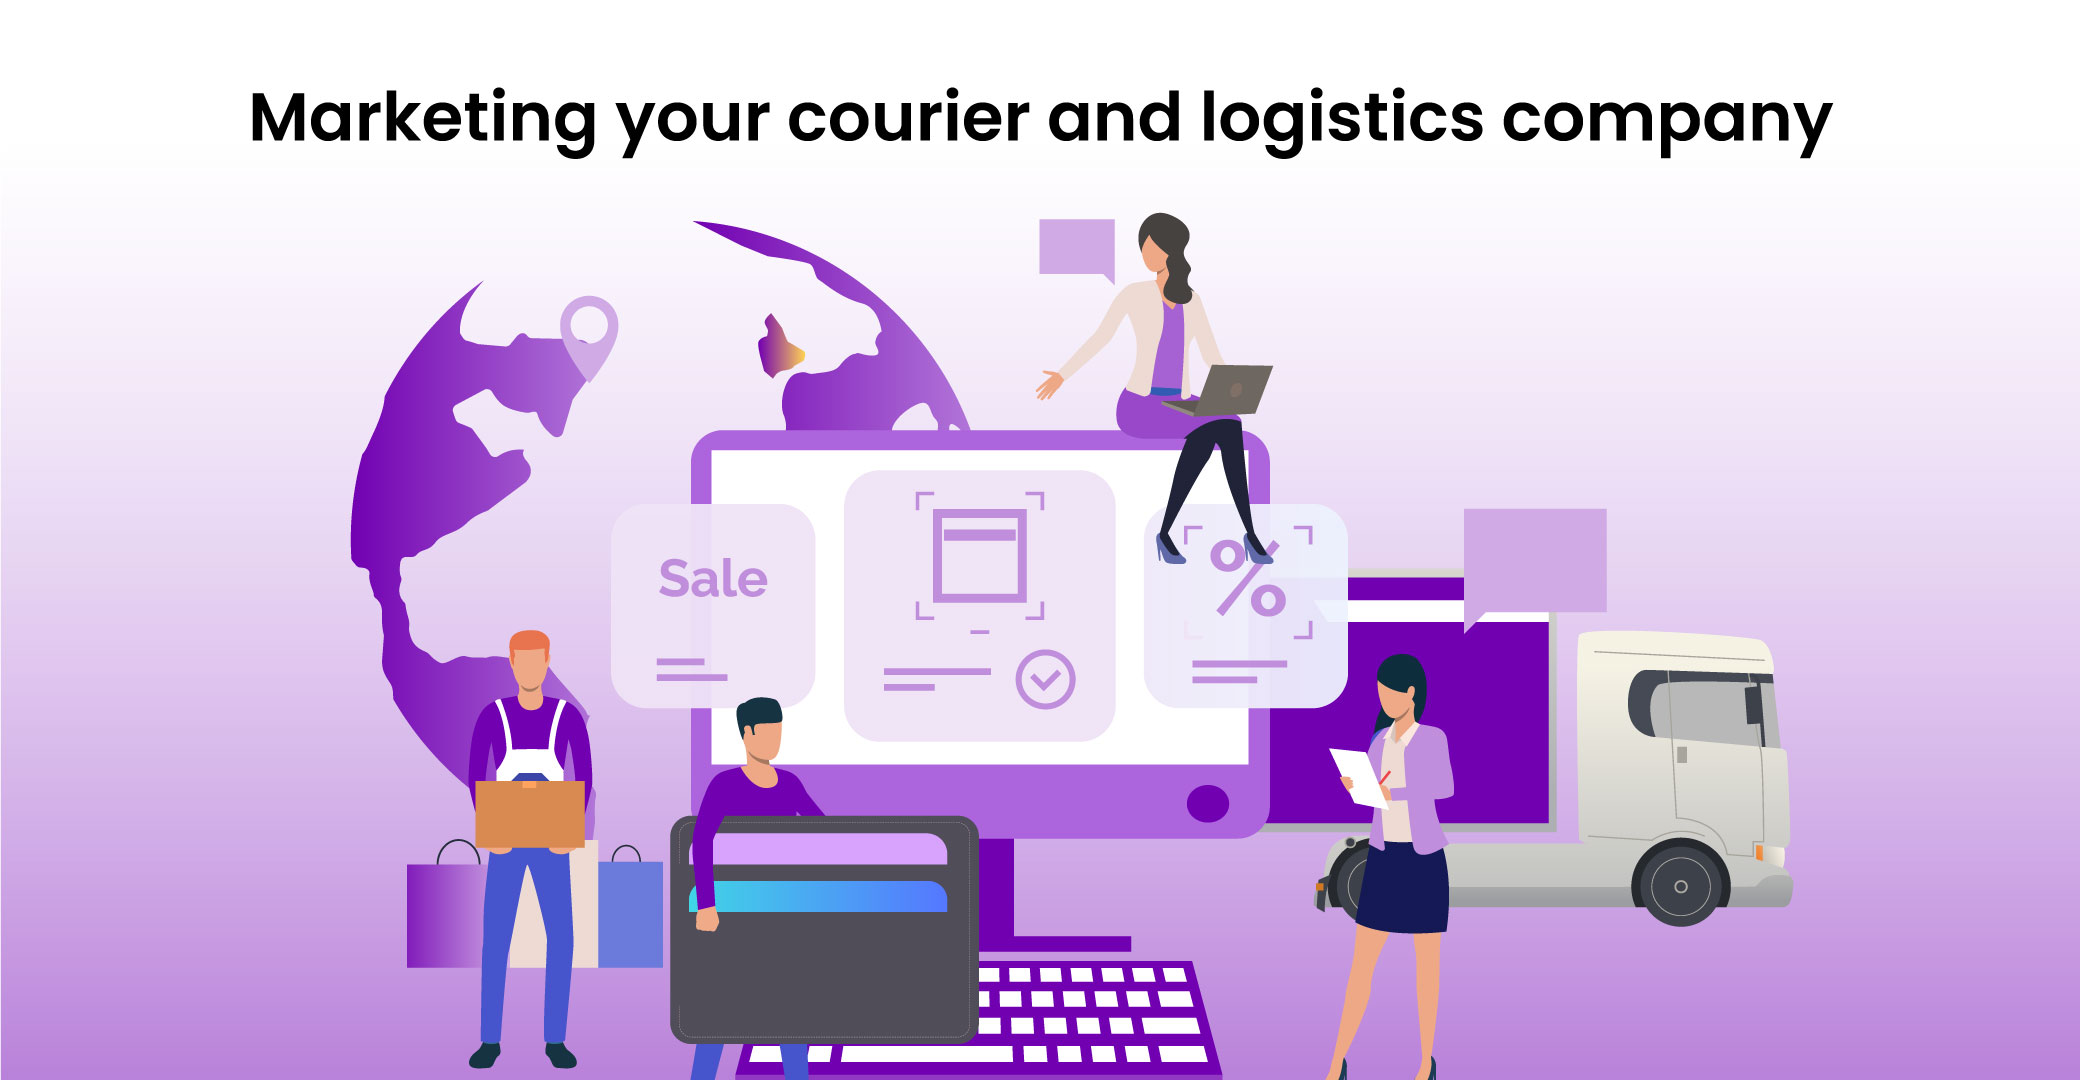 Marketing your courier and logistics company